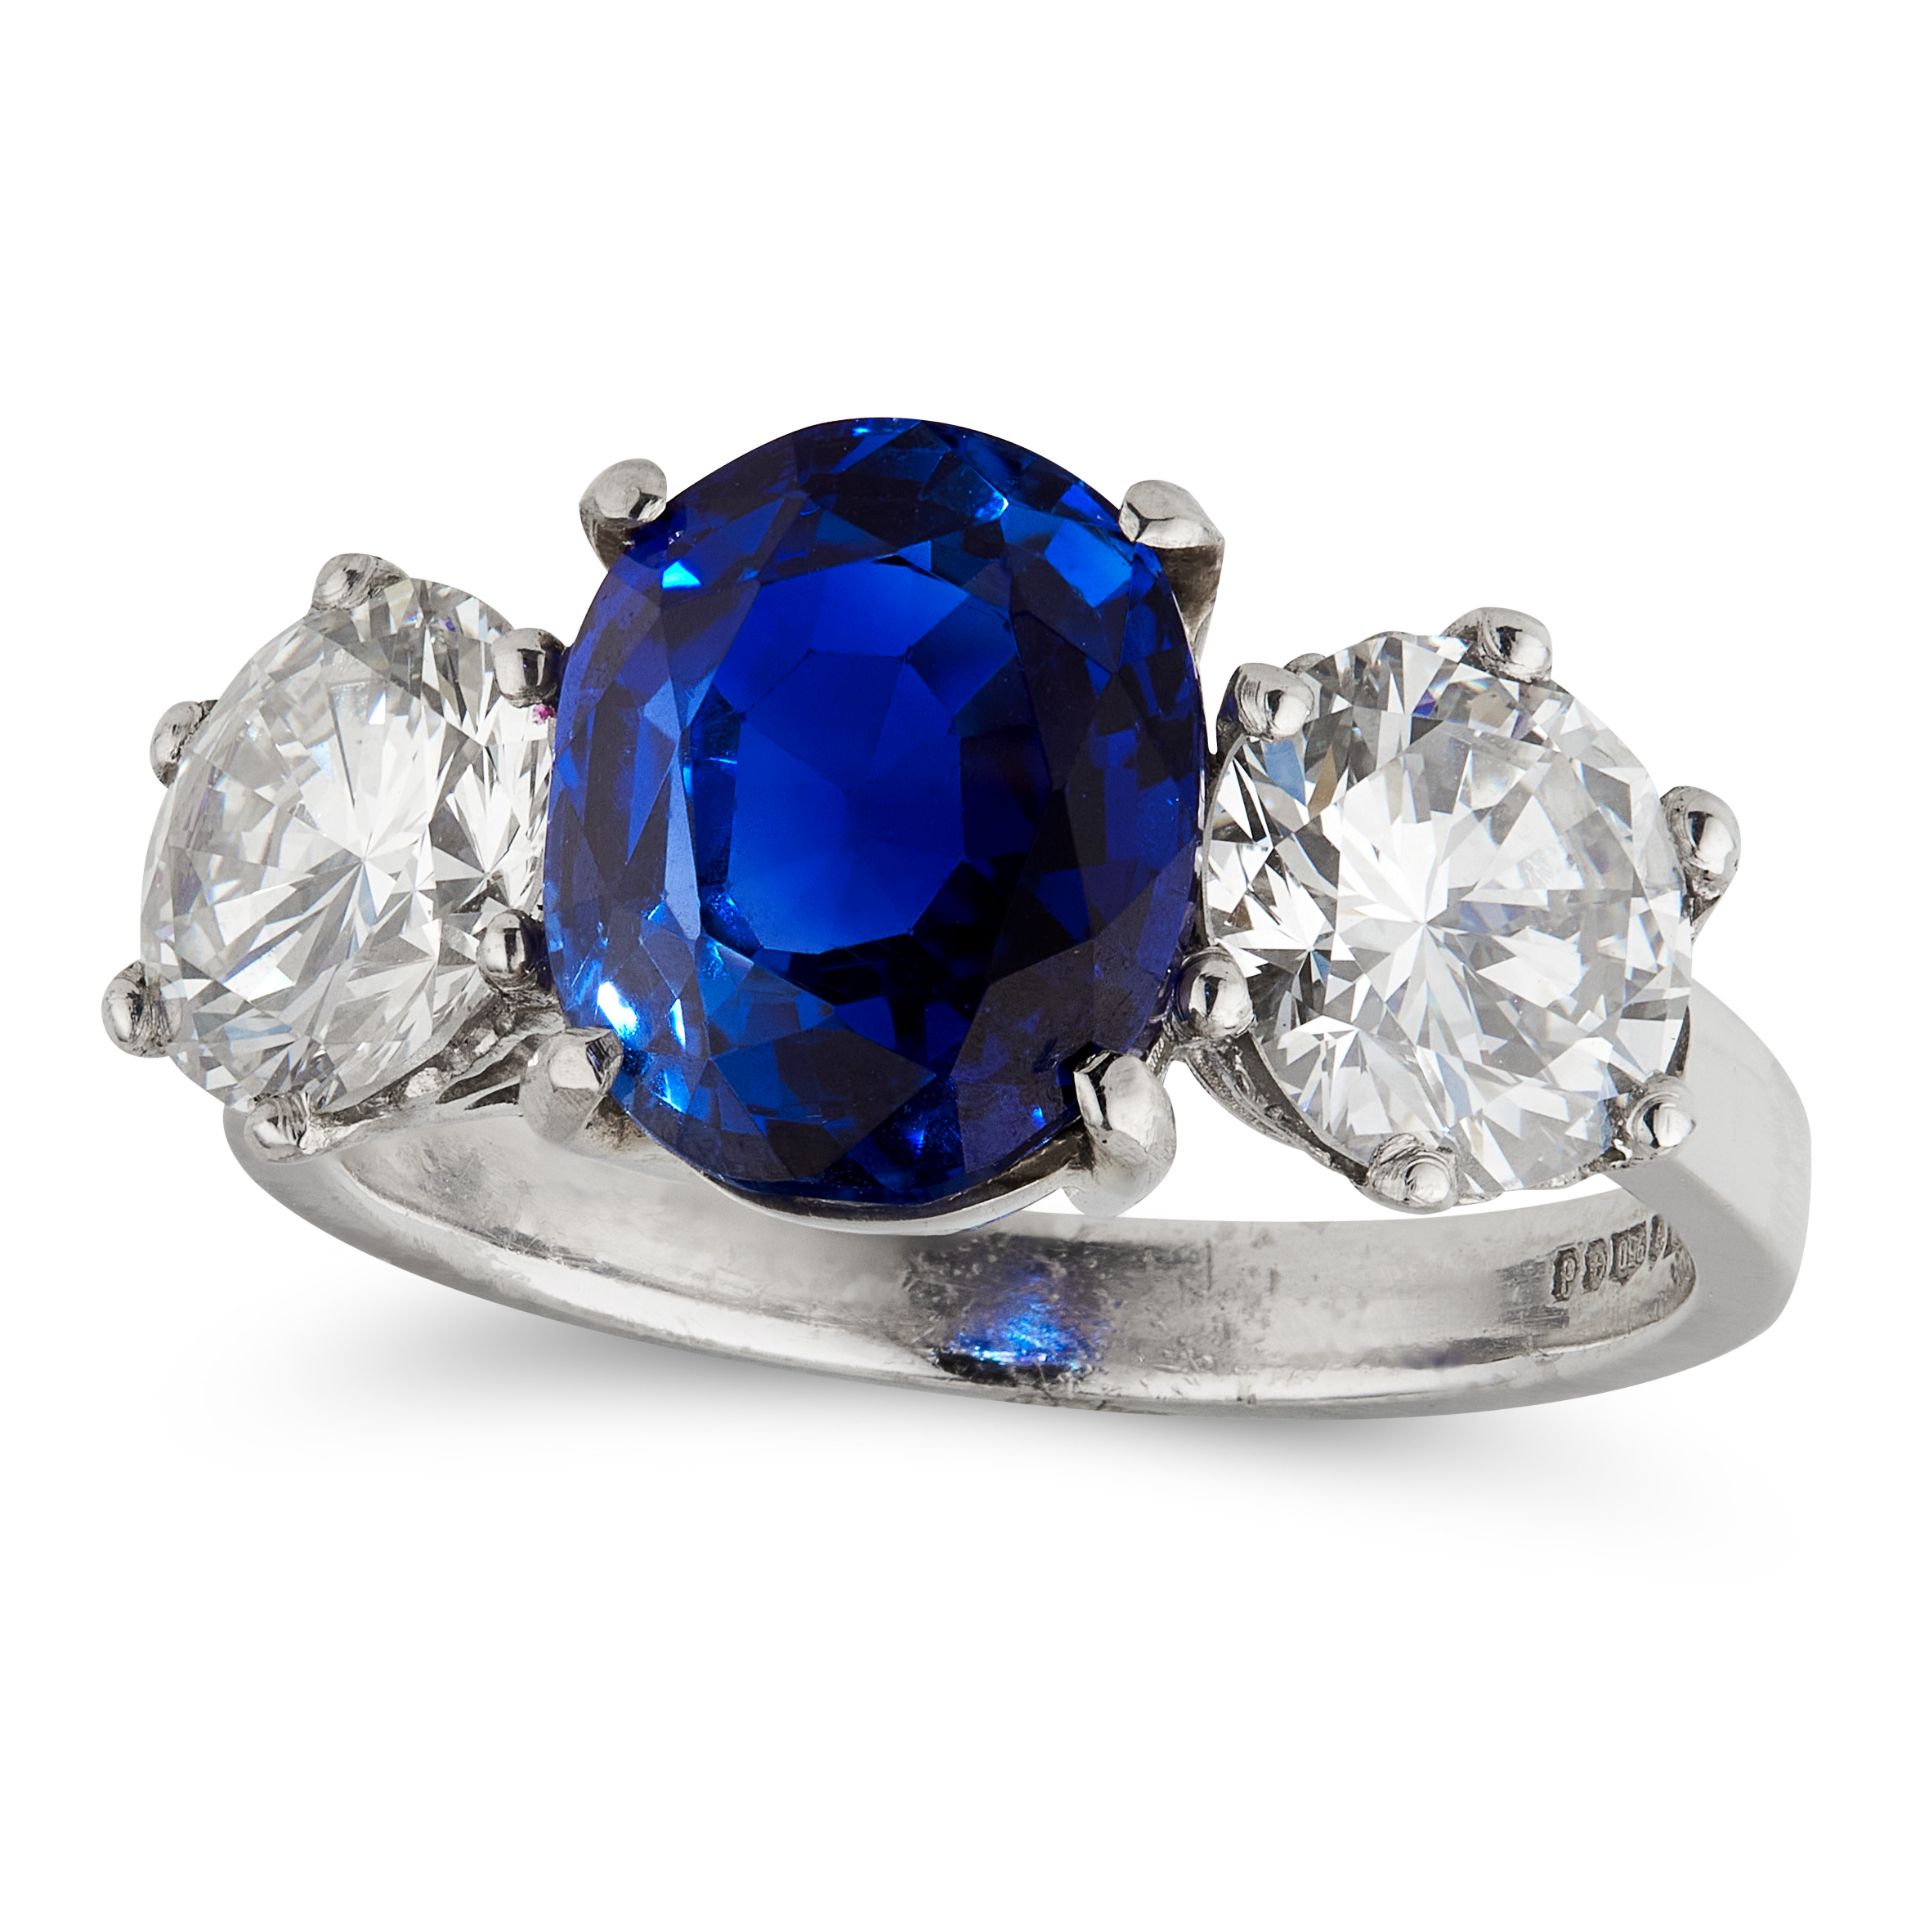 A BURMA NO HEAT SAPPHIRE AND DIAMOND RING in platinum, set with a cushion cut blue sapphire of 4.